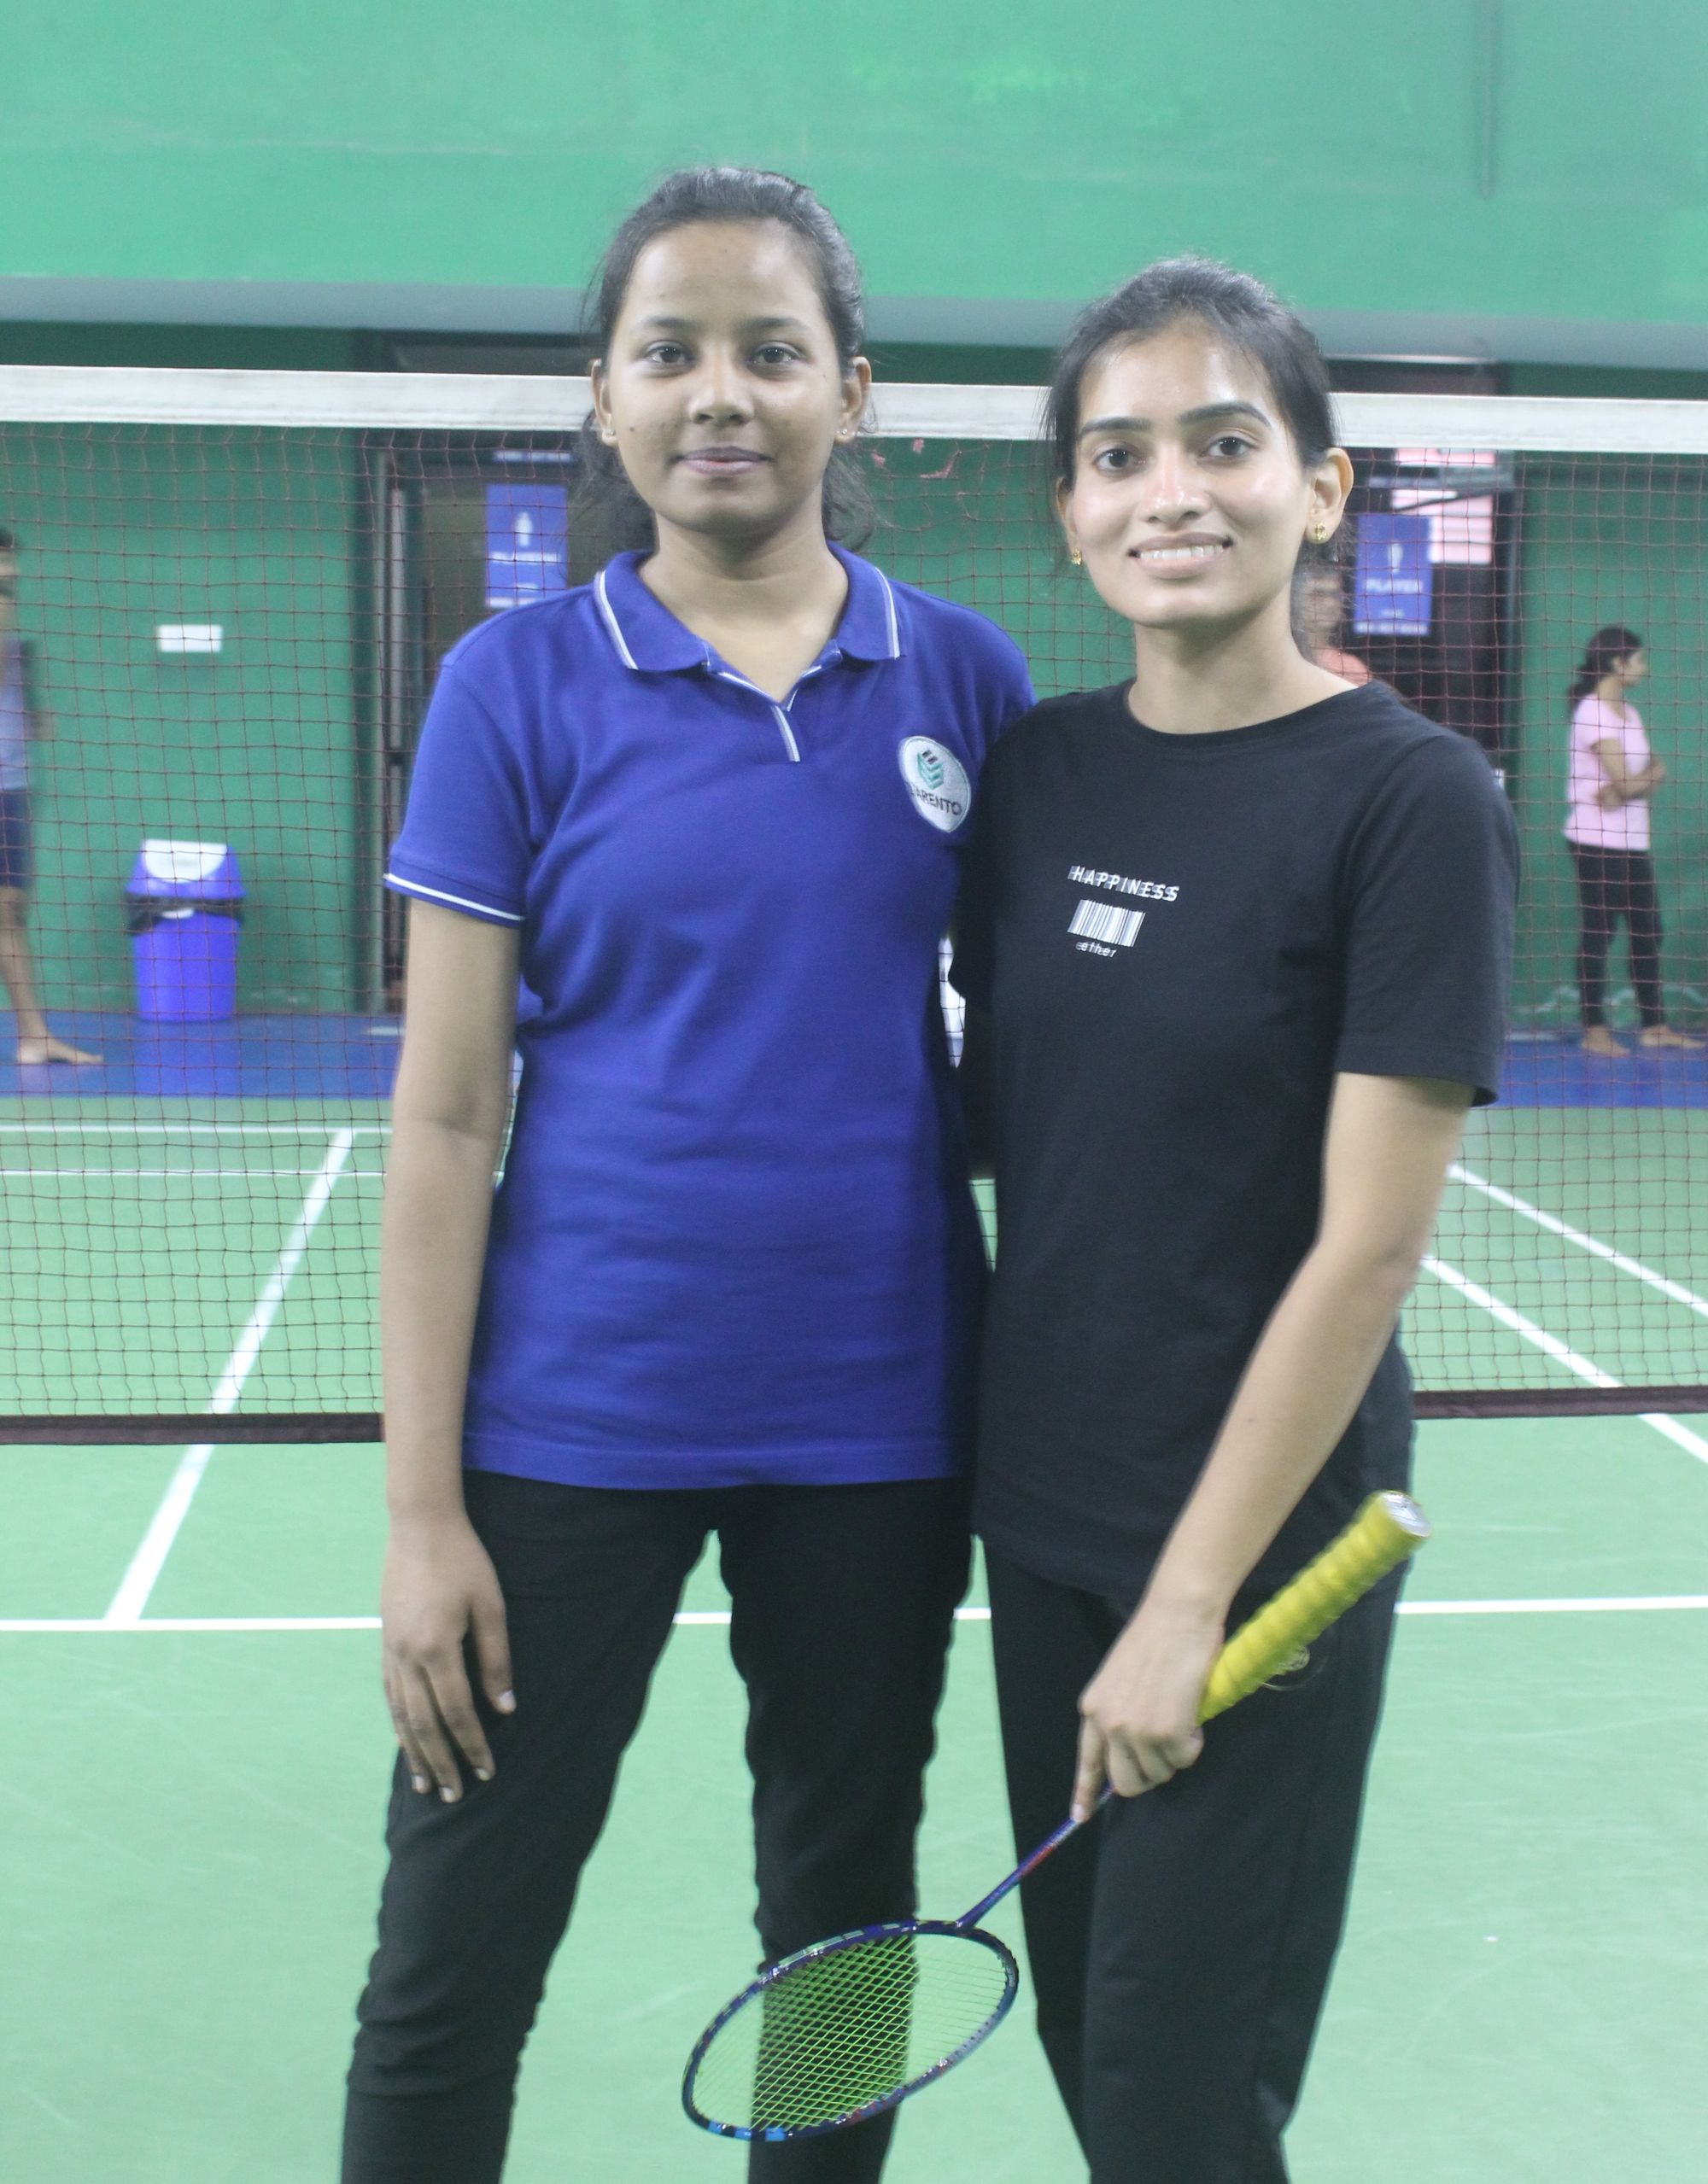 Glimpses from the action-packed Tarento Badminton Championship 2022! related